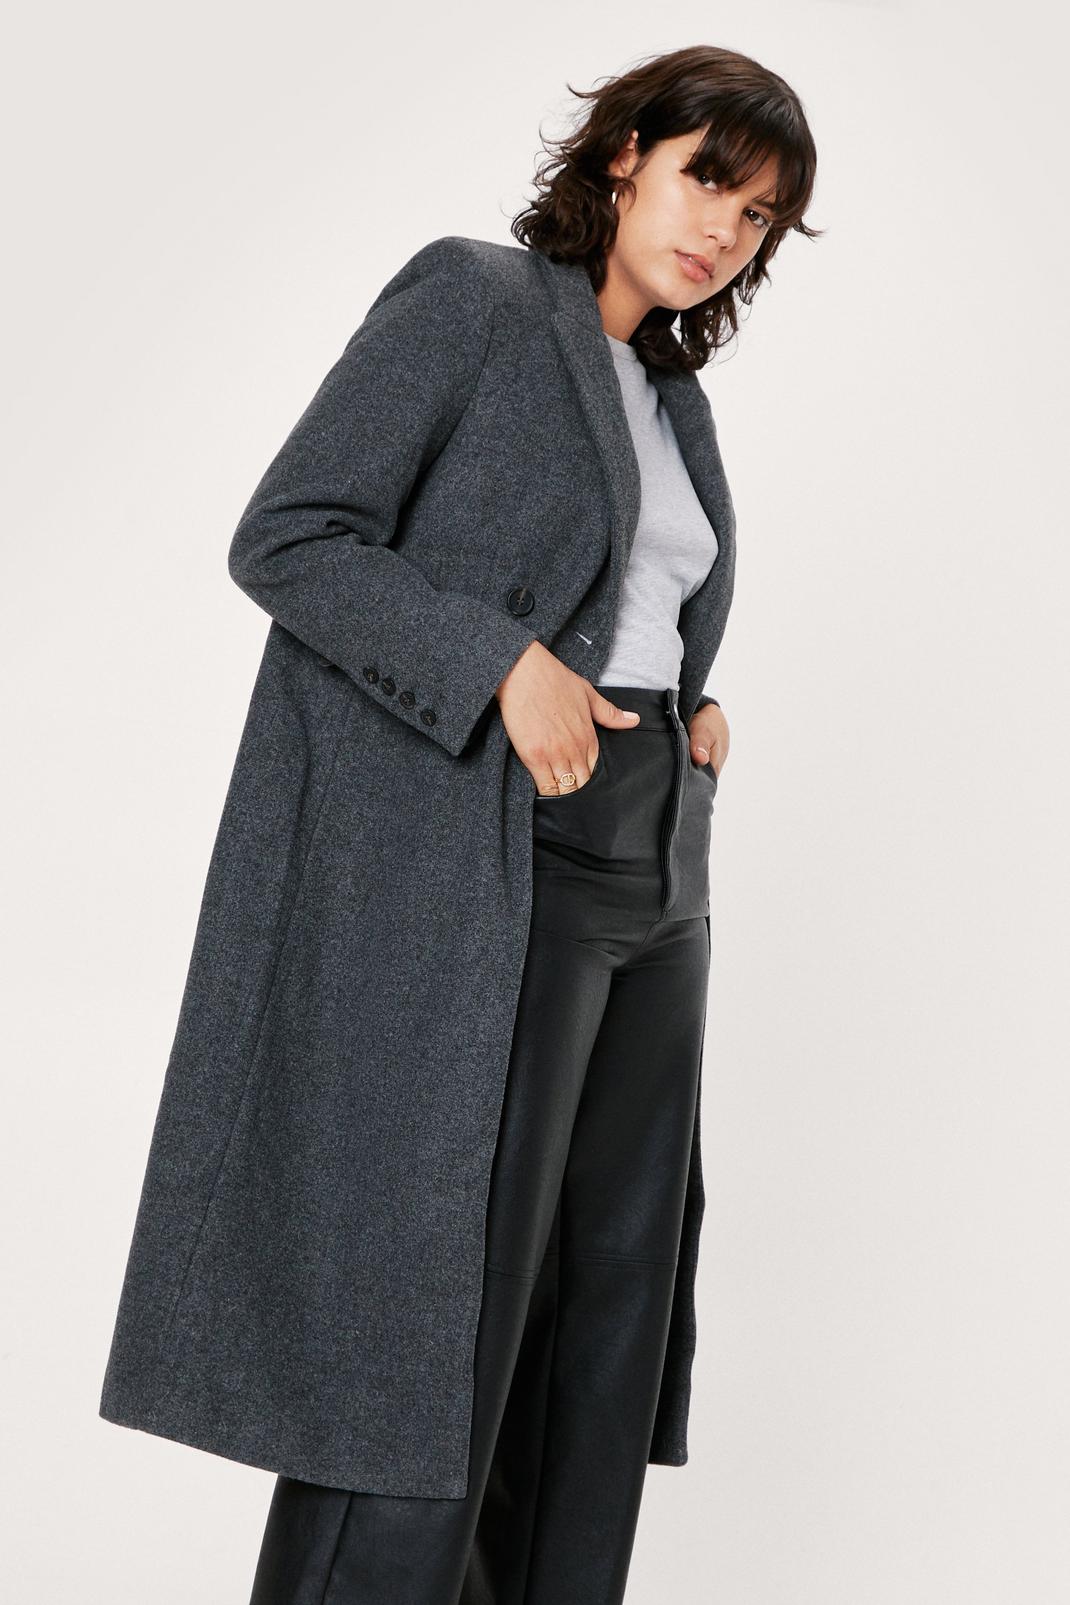 Wool Mix Long Line Double Breasted Tailored Coat